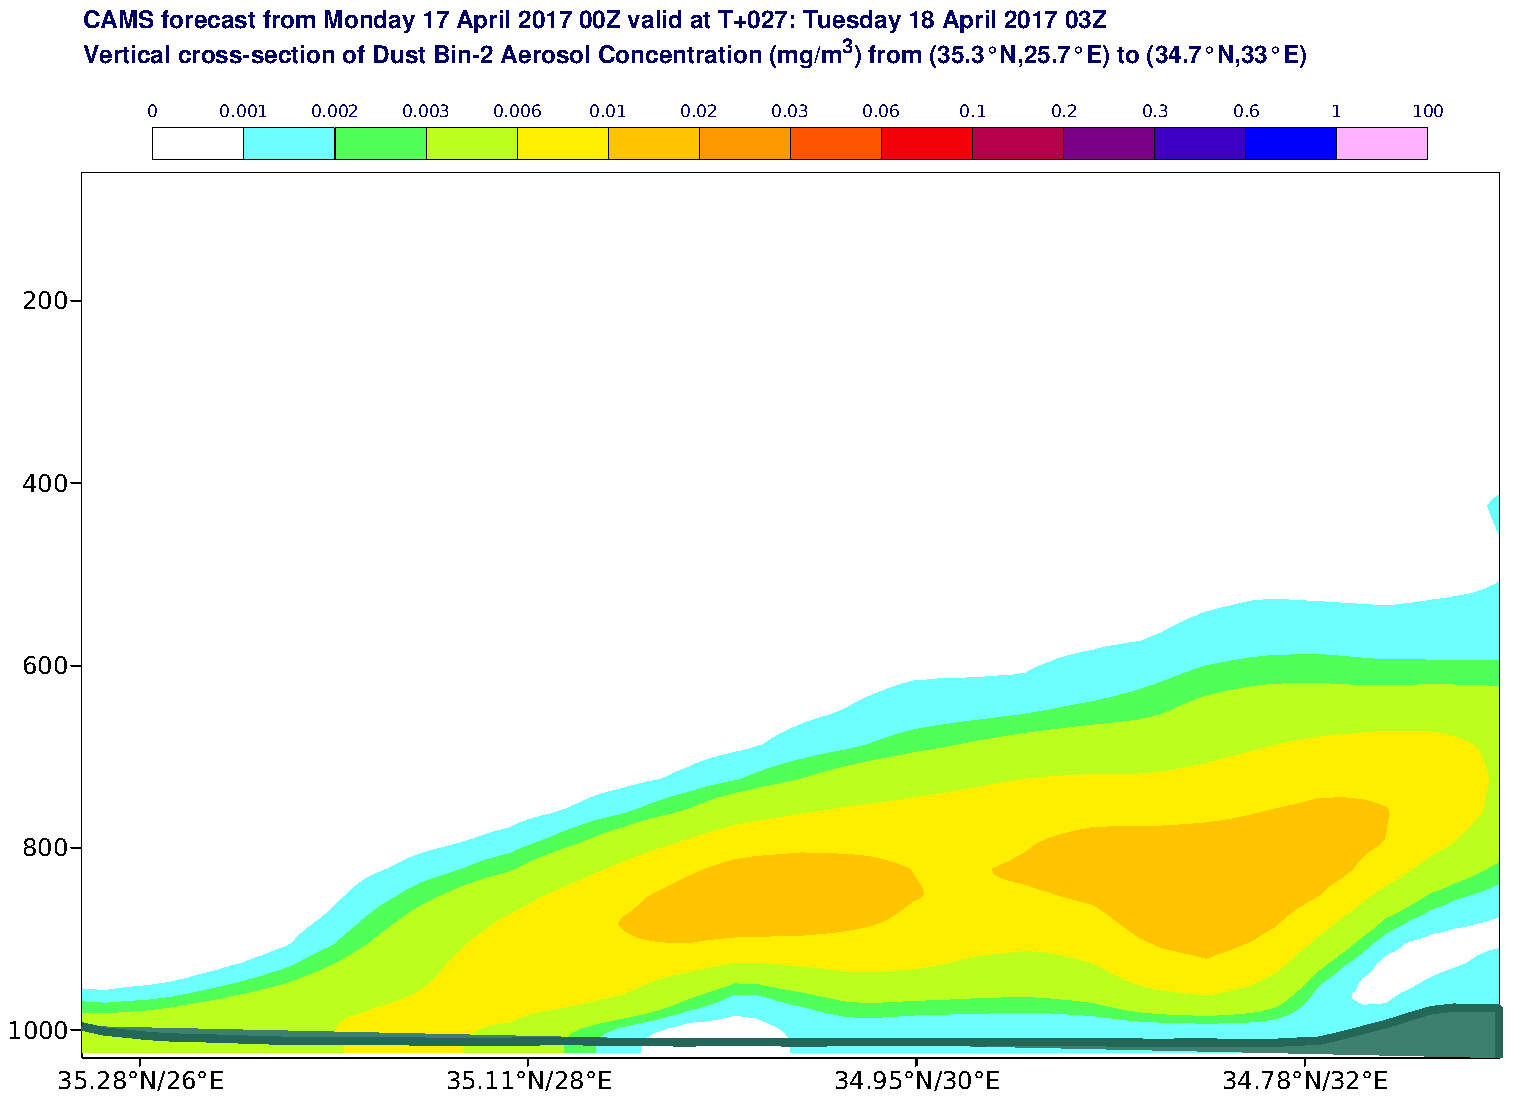 Vertical cross-section of Dust Bin-2 Aerosol Concentration (mg/m3) valid at T27 - 2017-04-18 03:00